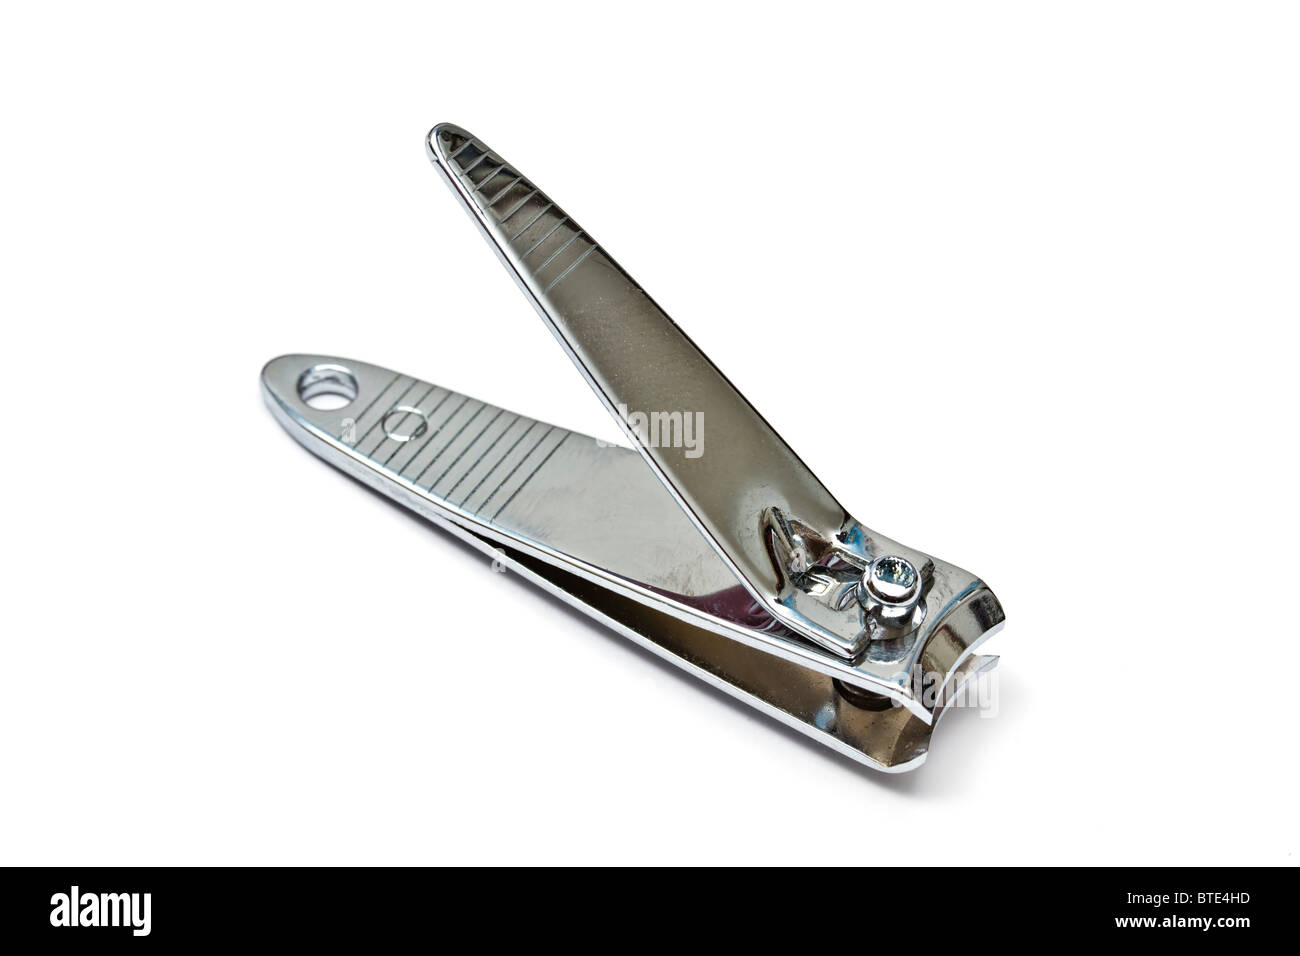 Nail clippers isolated on white background Stock Photo